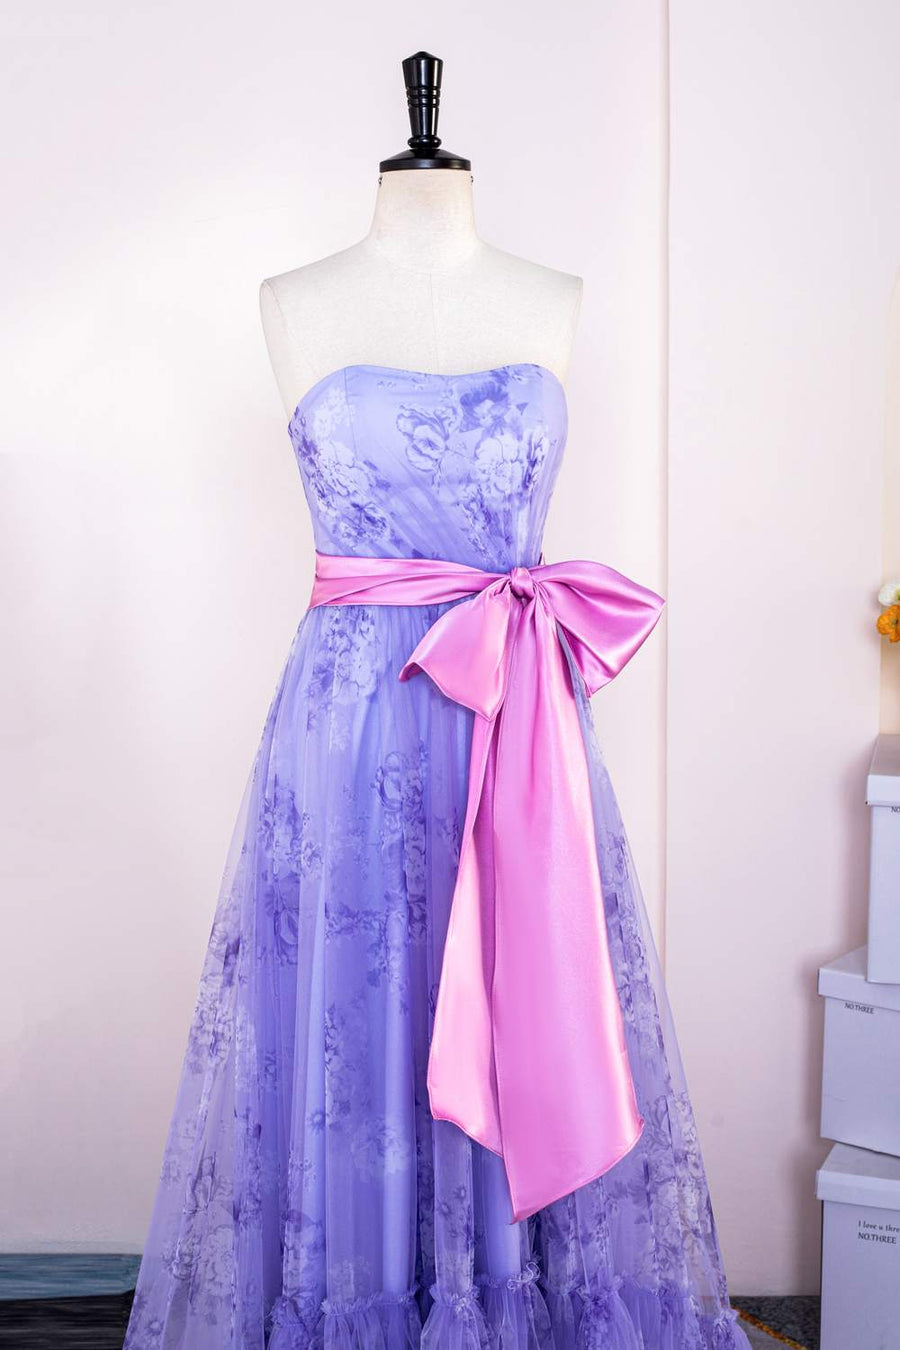 Lavender Strapless Ruffled Floral Long Prom Dress with Bow Sash